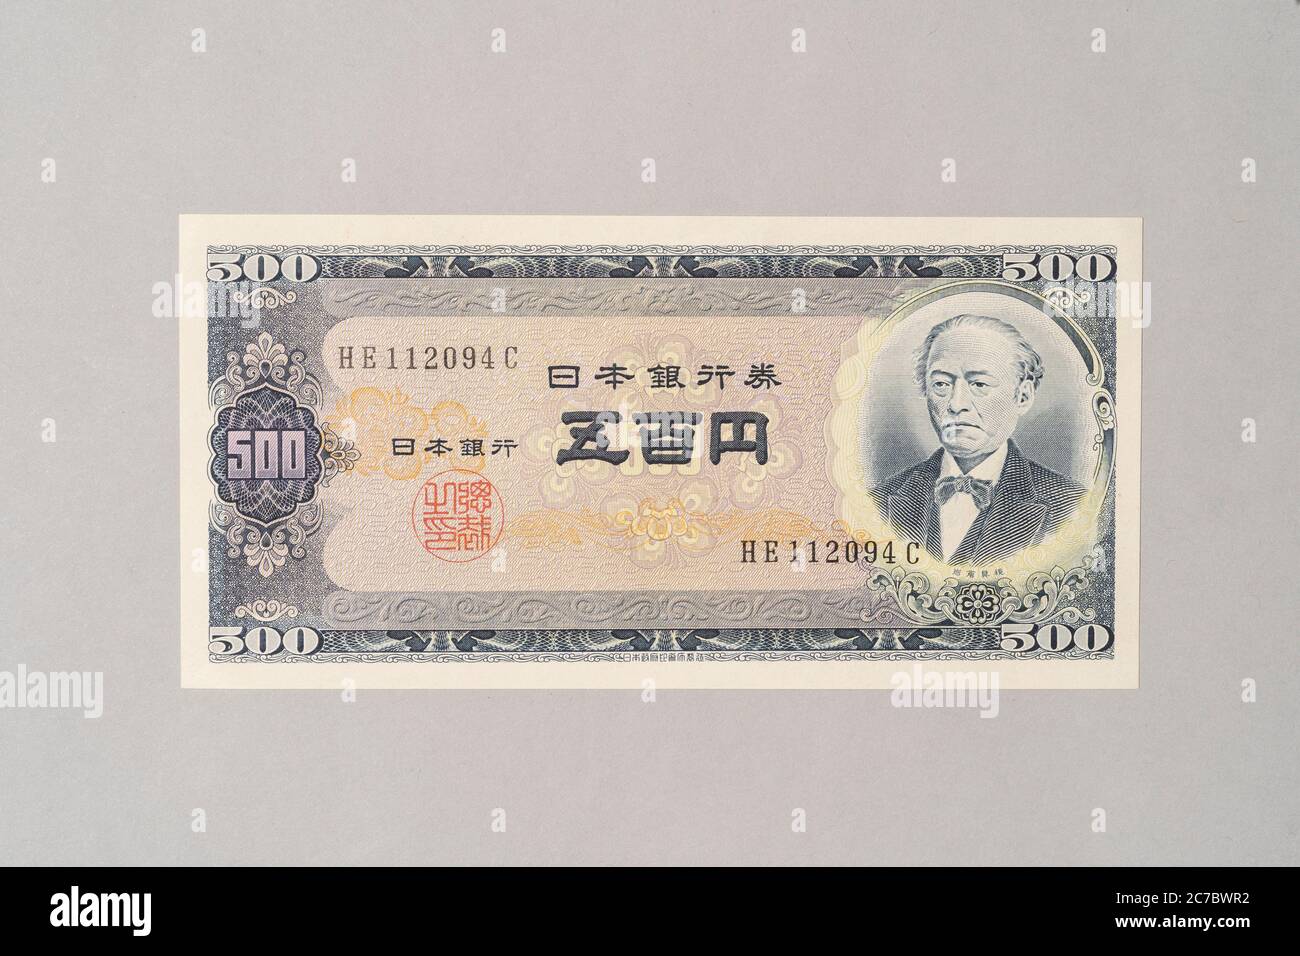 Japanese banknote 500 yen, Private Collection Stock Photo